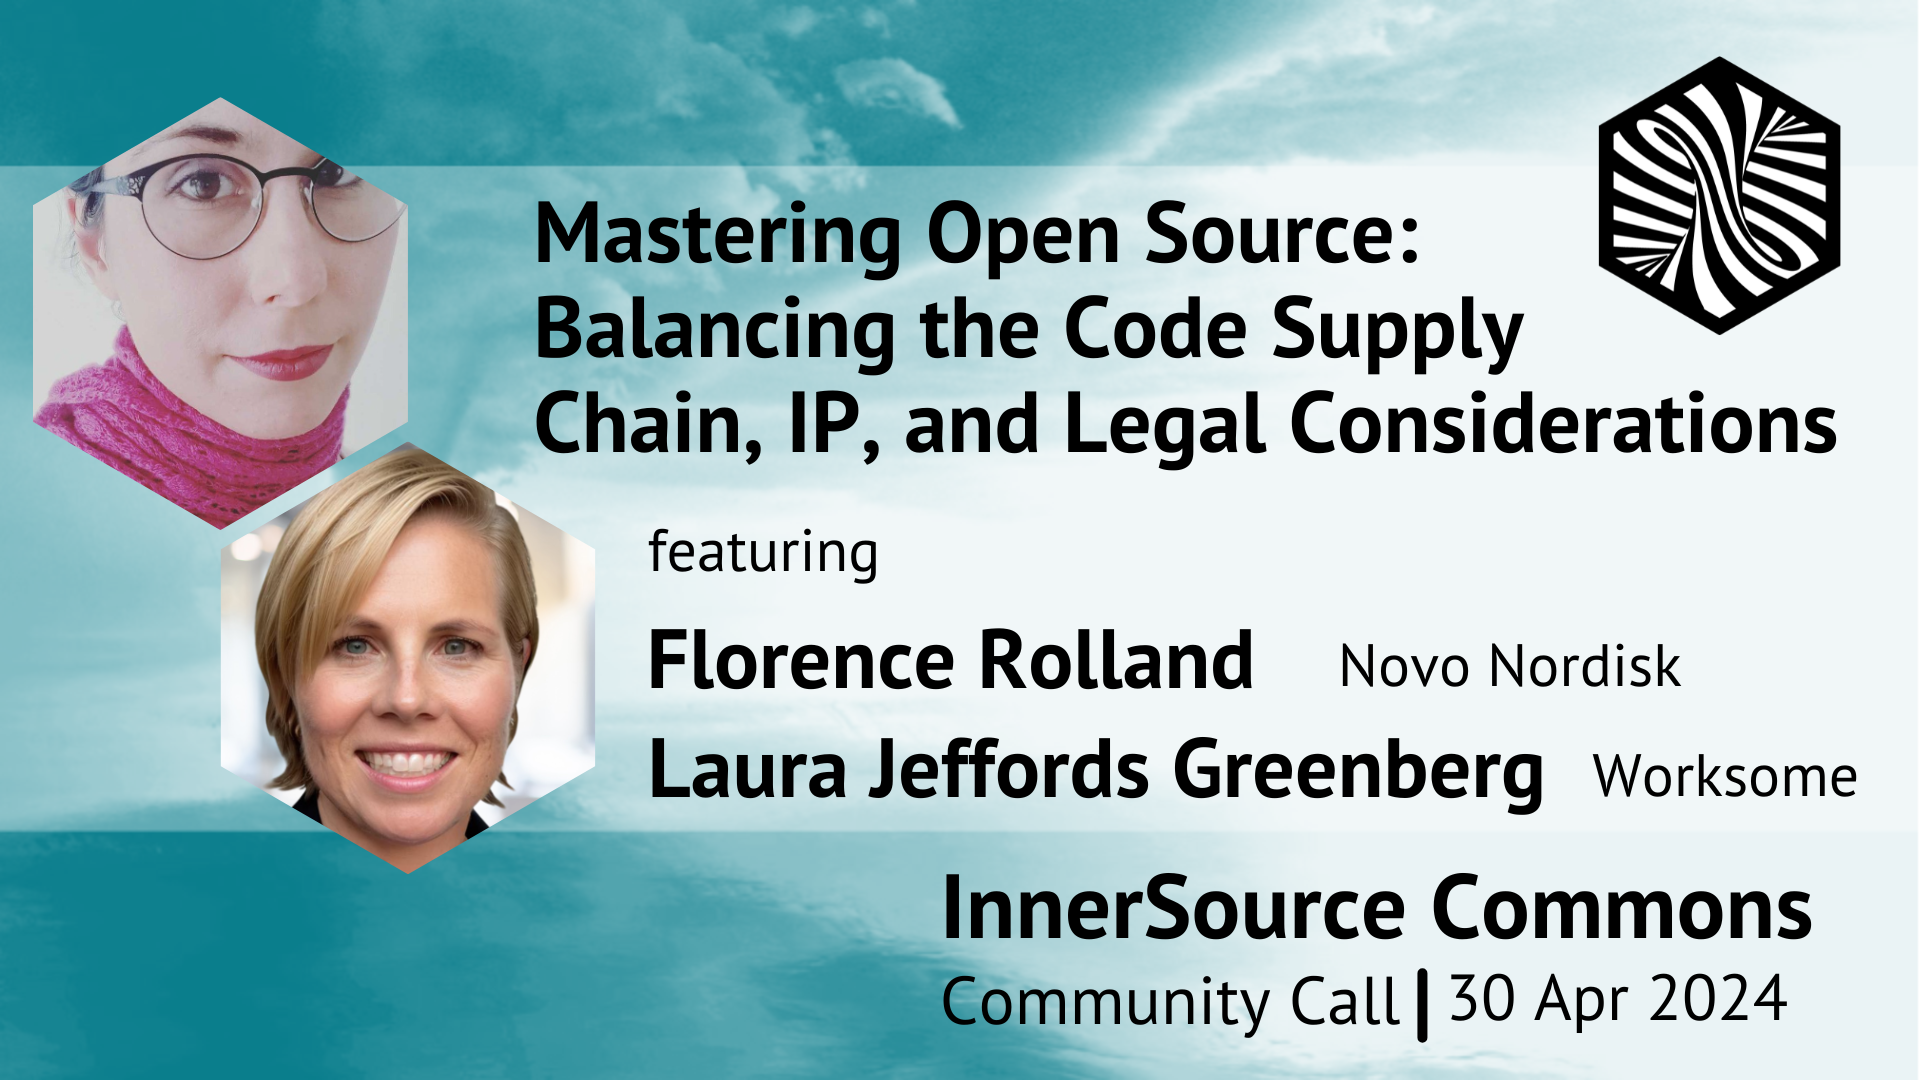 Mastering Open Source - Balancing the Code Supply Chain, IP, and Legal Considerations